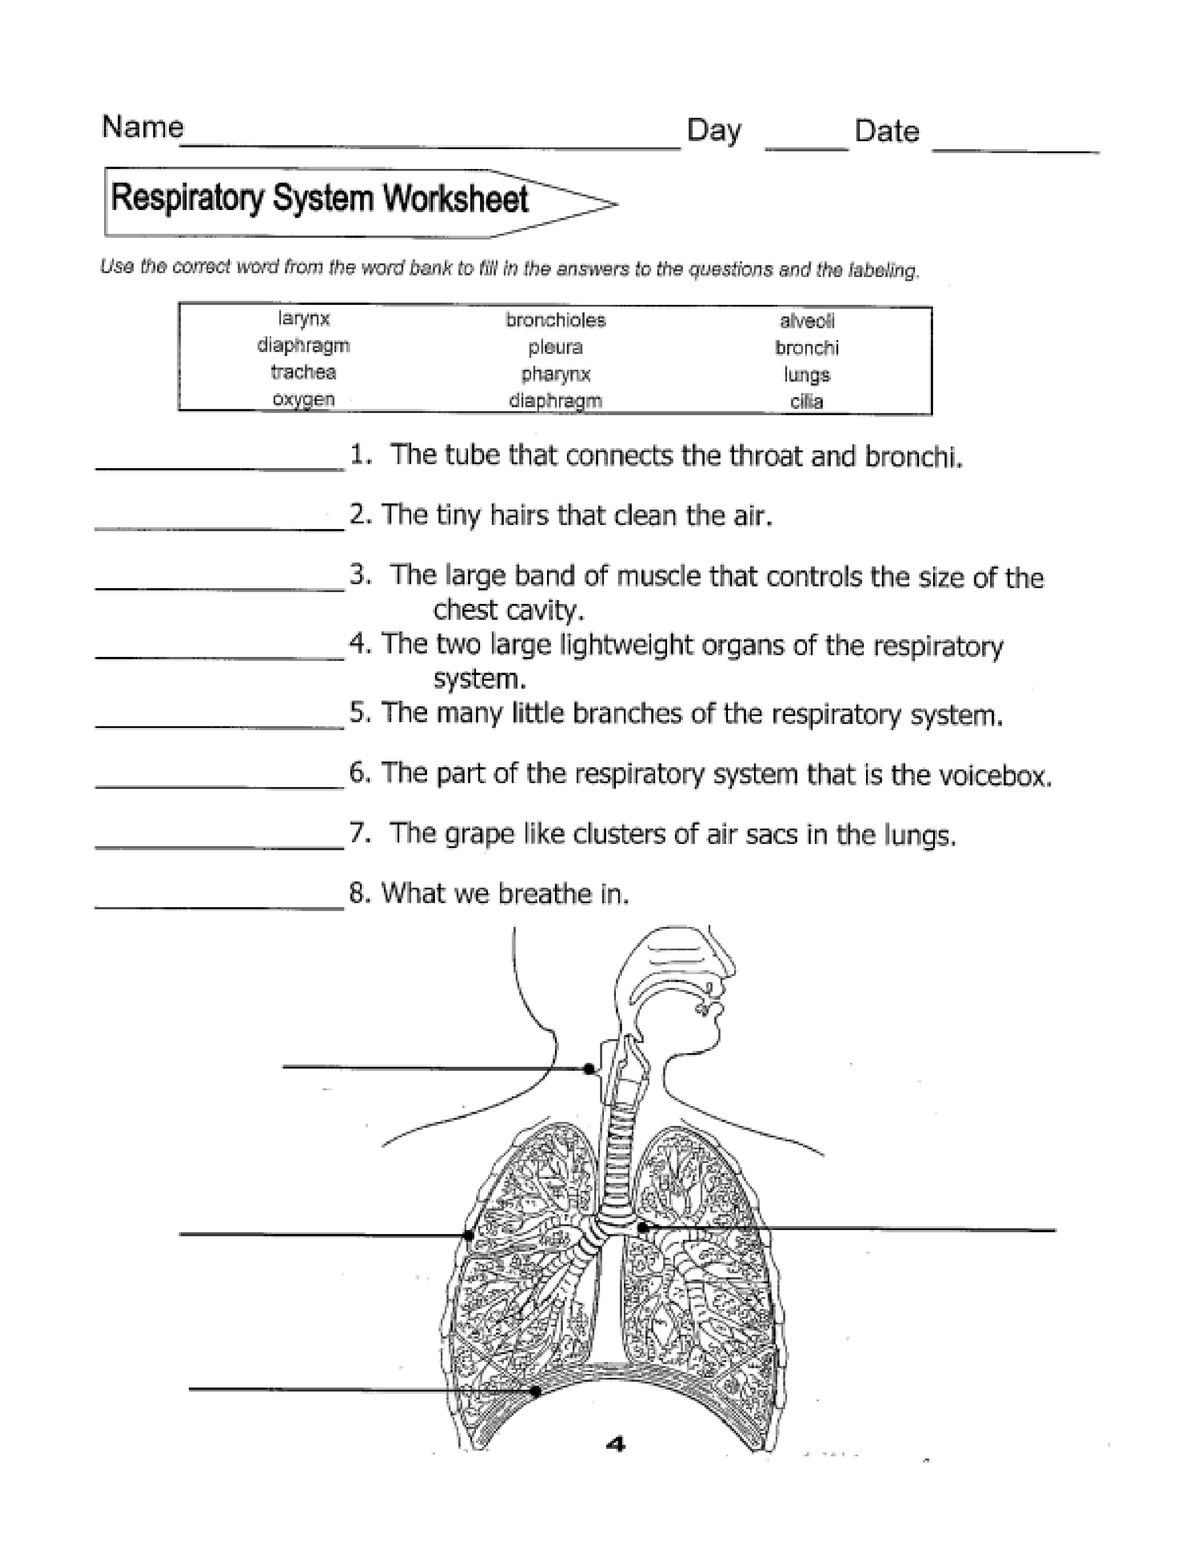 essay questions about respiratory system